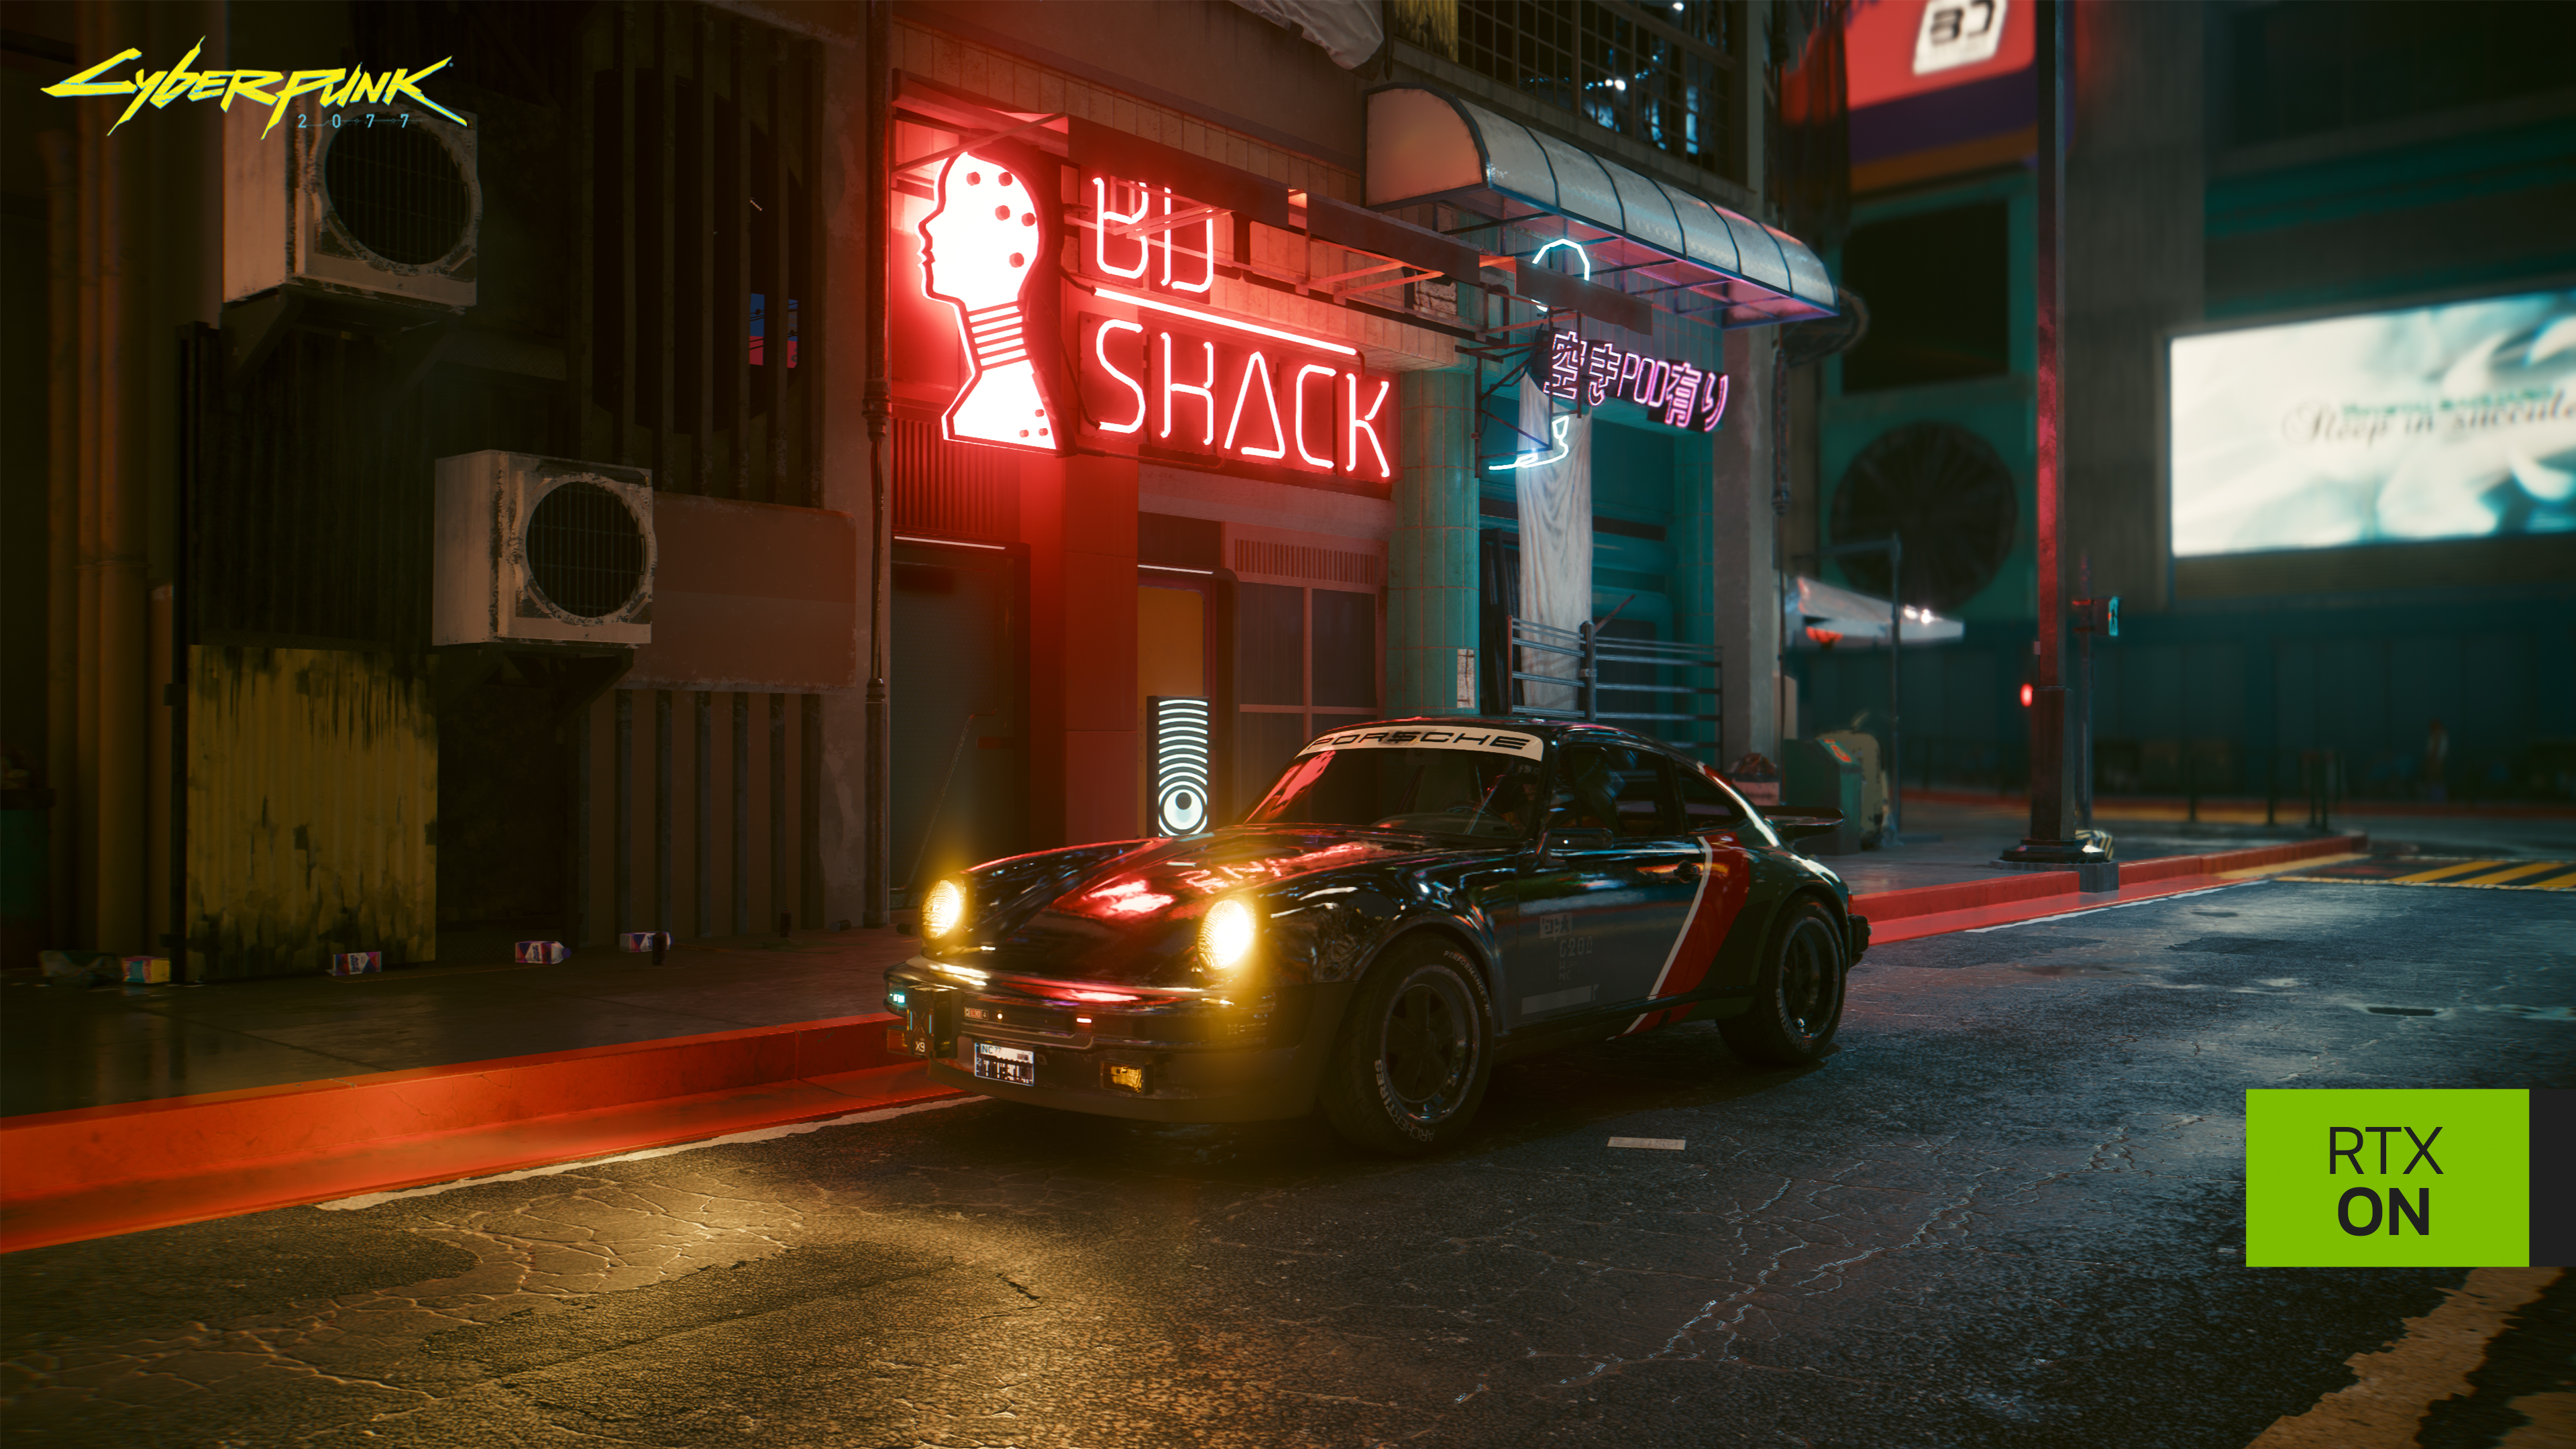 https://images.nvidia.com/aem-dam/Solutions/geforce/news/cyberpunk-2077-ray-tracing-overdrive-update-launches-april-11/cp2077-porschedof-rtx-on-badged.jpg